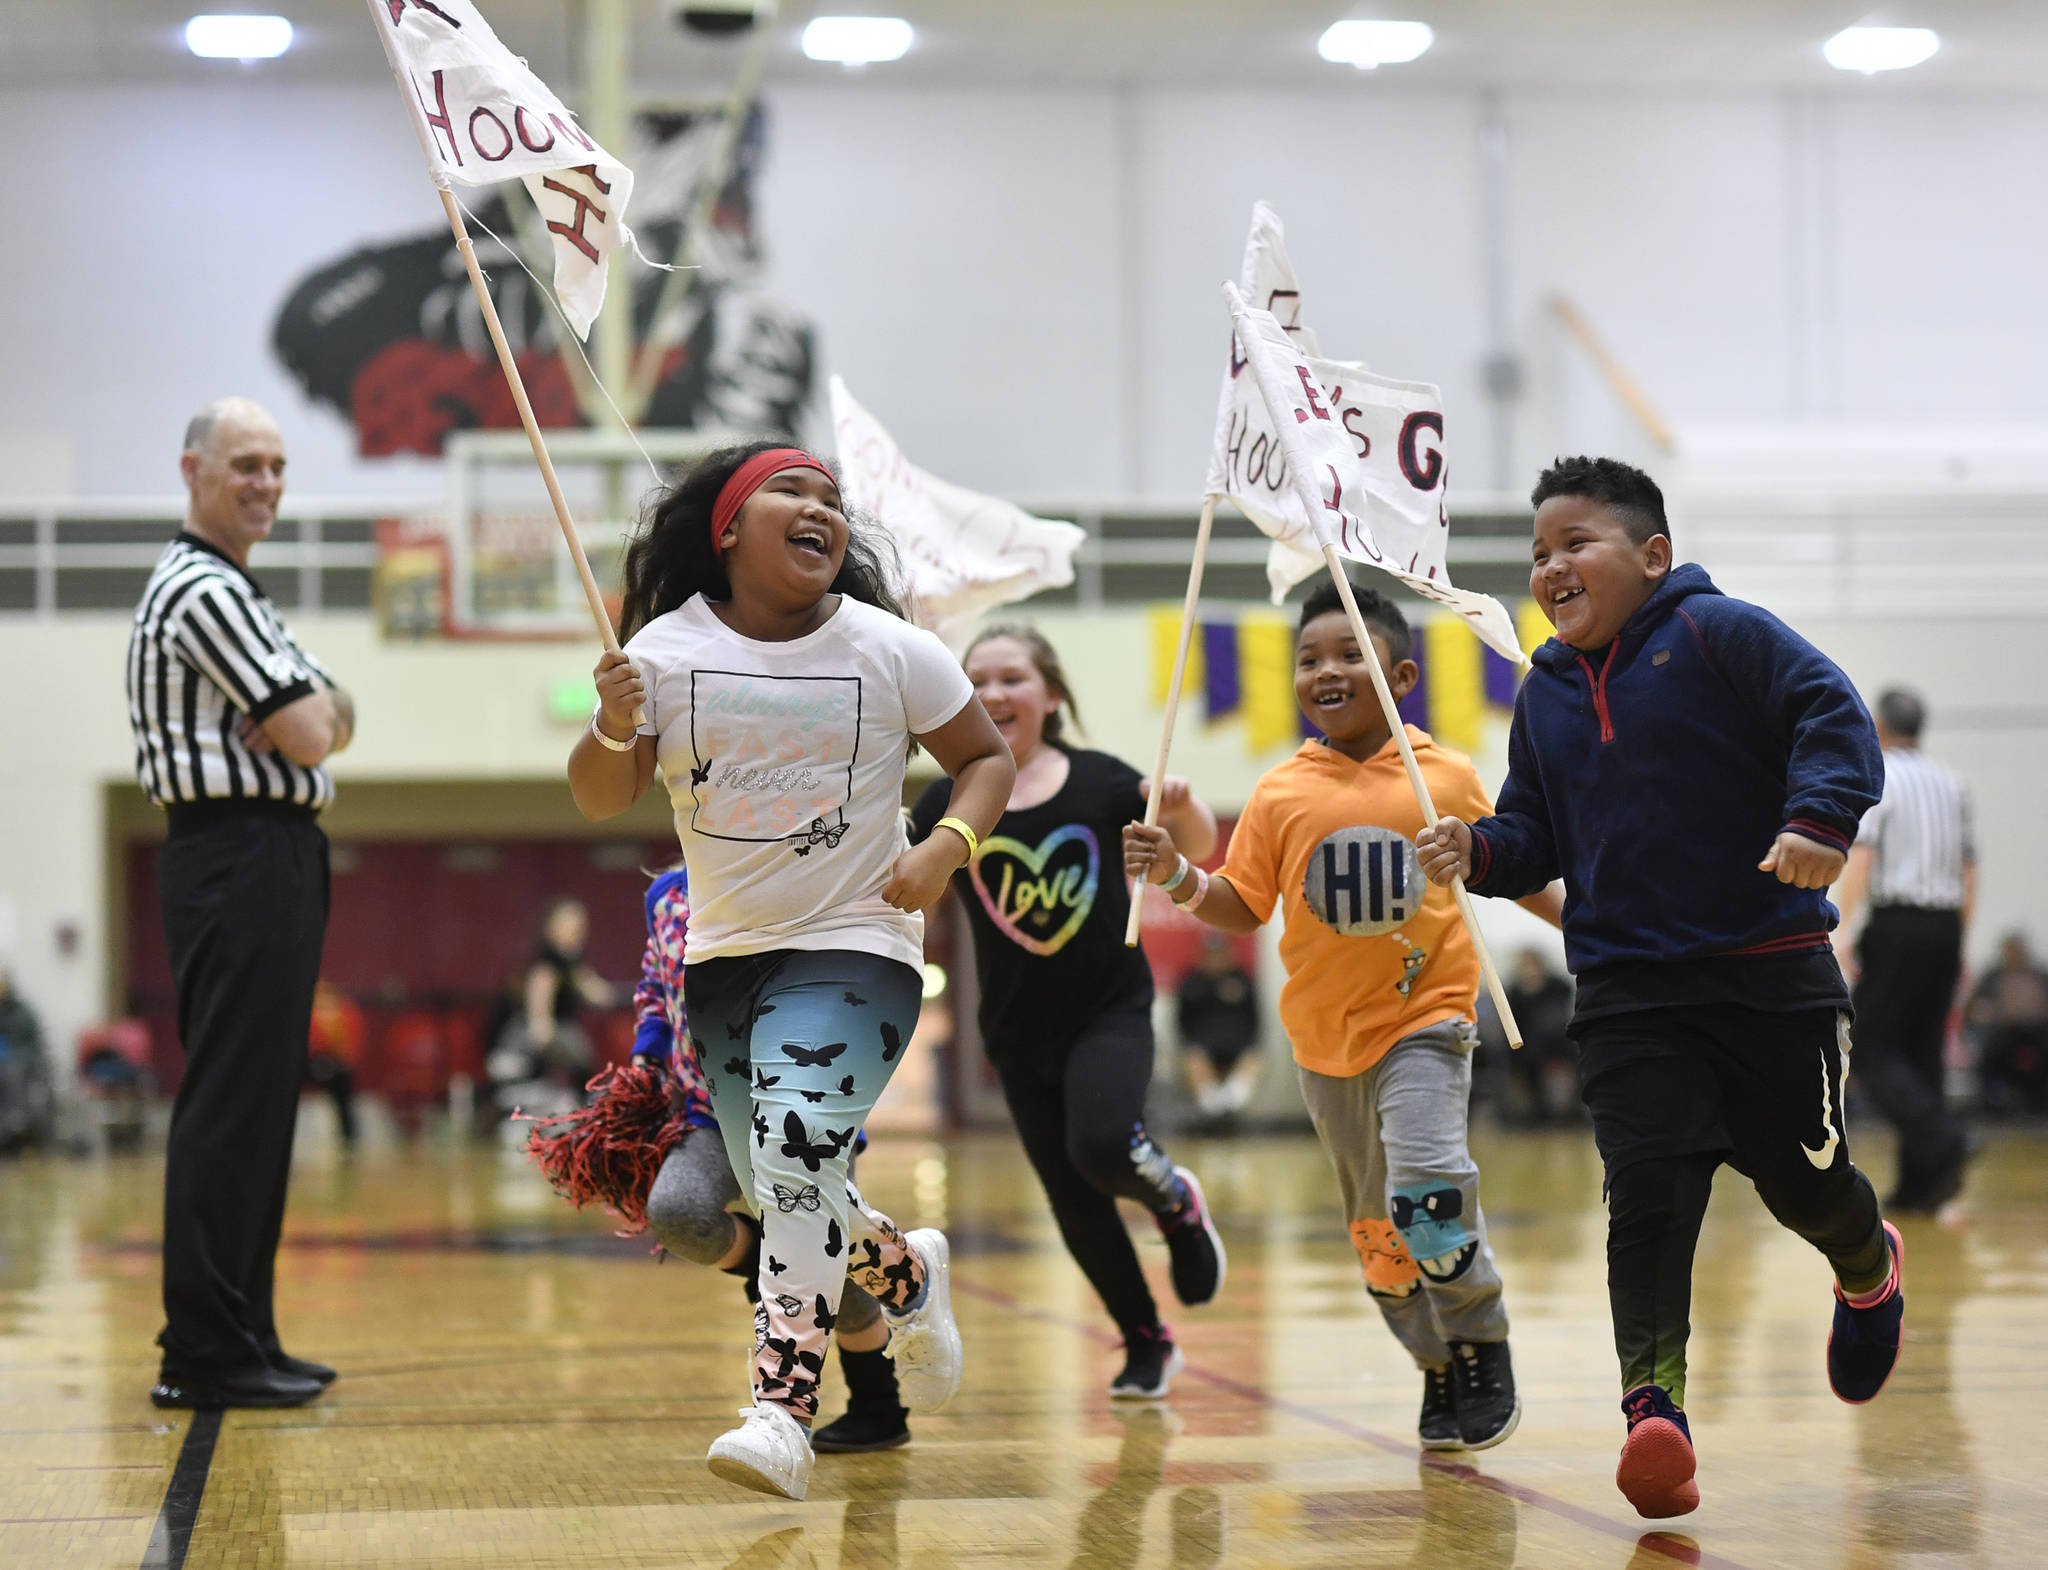 Children with Hoonah flags parade around the gymnasium during a break in the women’s game against Skagway at the Juneau Lions Club 73rd Annual Gold Medal Basketball Tournament at Juneau-Douglas High School: Yadaa.at Kalé on Tuesday, March 19, 2019. Skagway won 80-42. (Michael Penn | Juneau Empire)